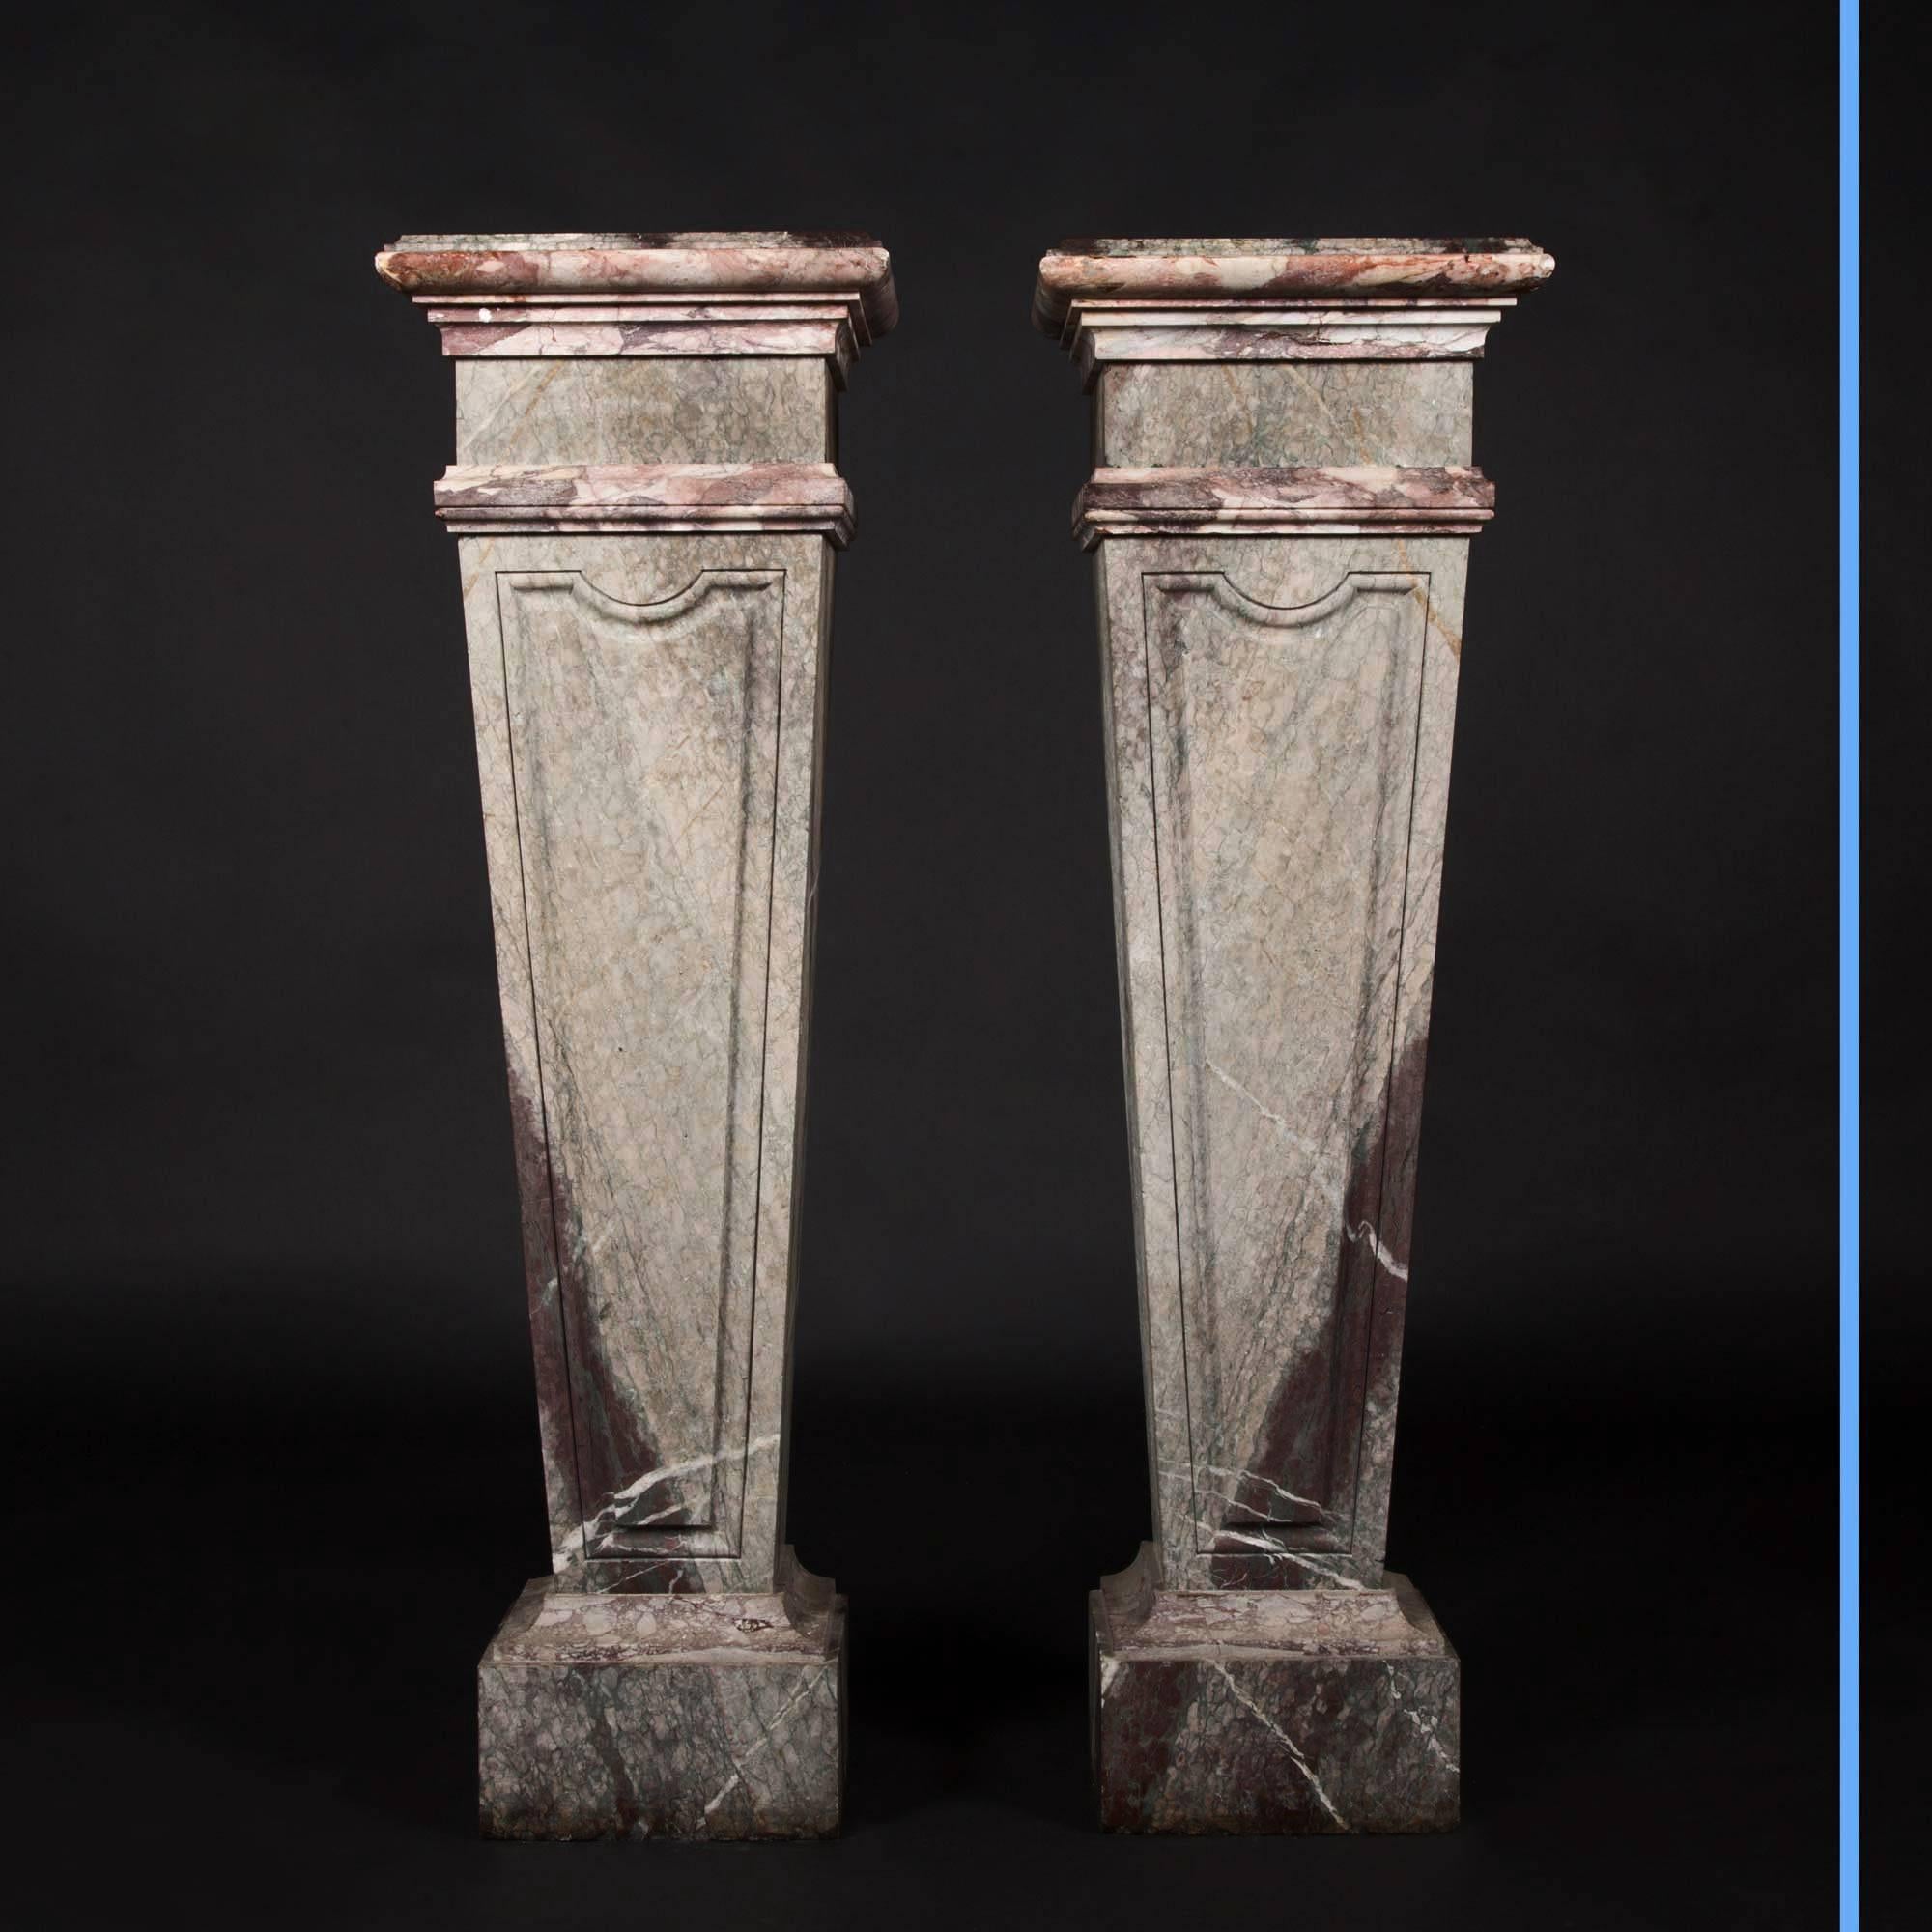 Pair of marble column pedestals with green and purple marble inlay,
19th century.
French work
Measures: H. 124 - L. 30 - D. 38 cm.

A very fine French marble column pedestal in three sections including the tapering main body, incised panel with